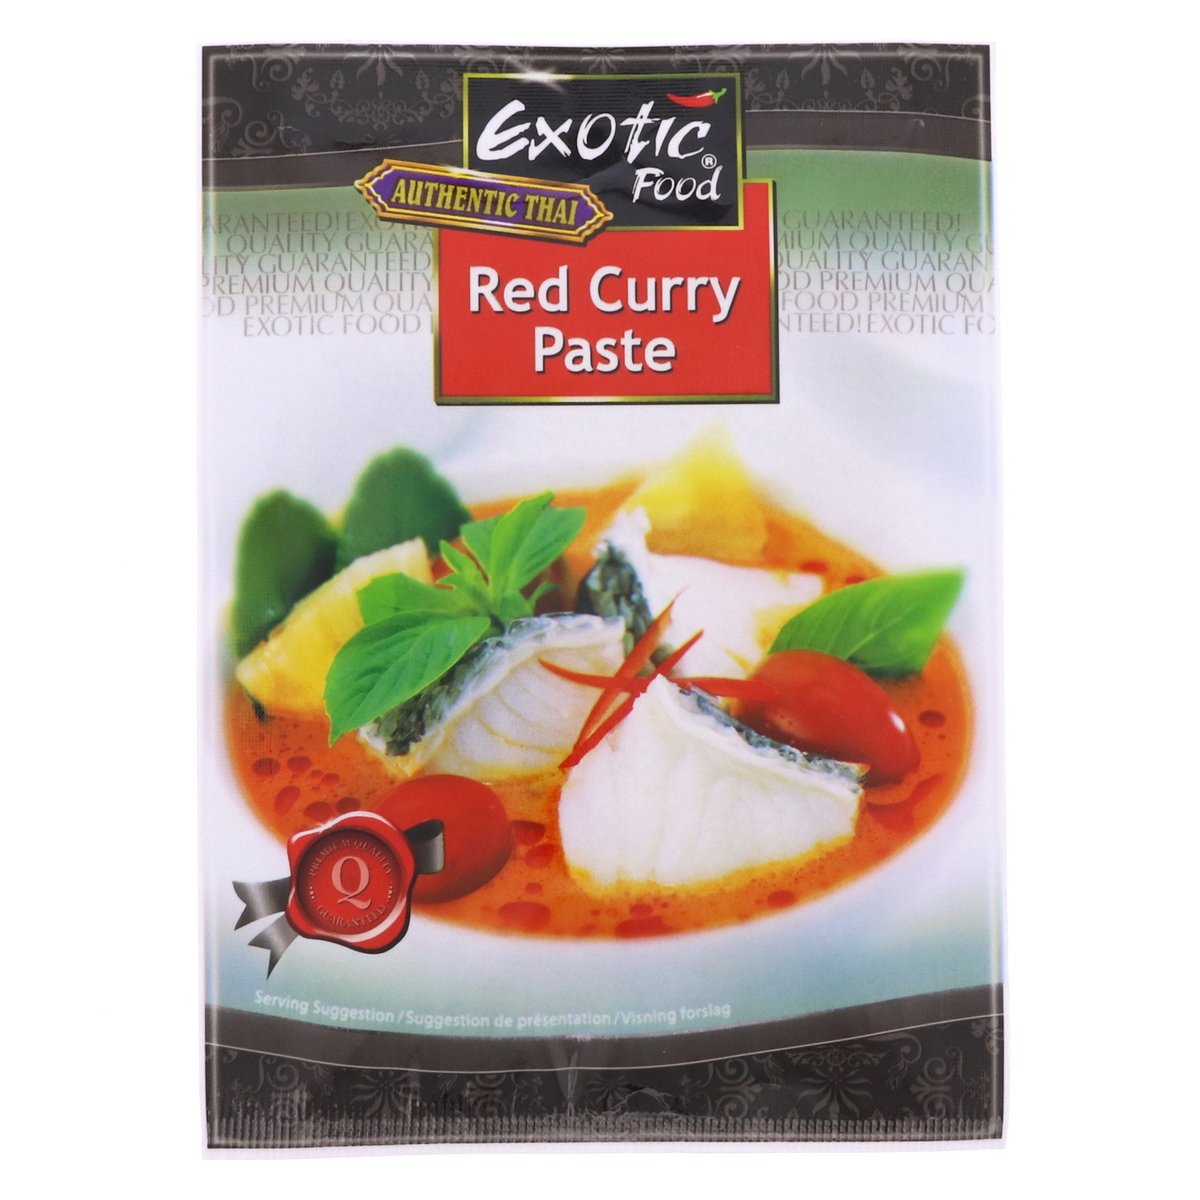 Exotic Food Authentic Thai Red Curry Paste 50 g